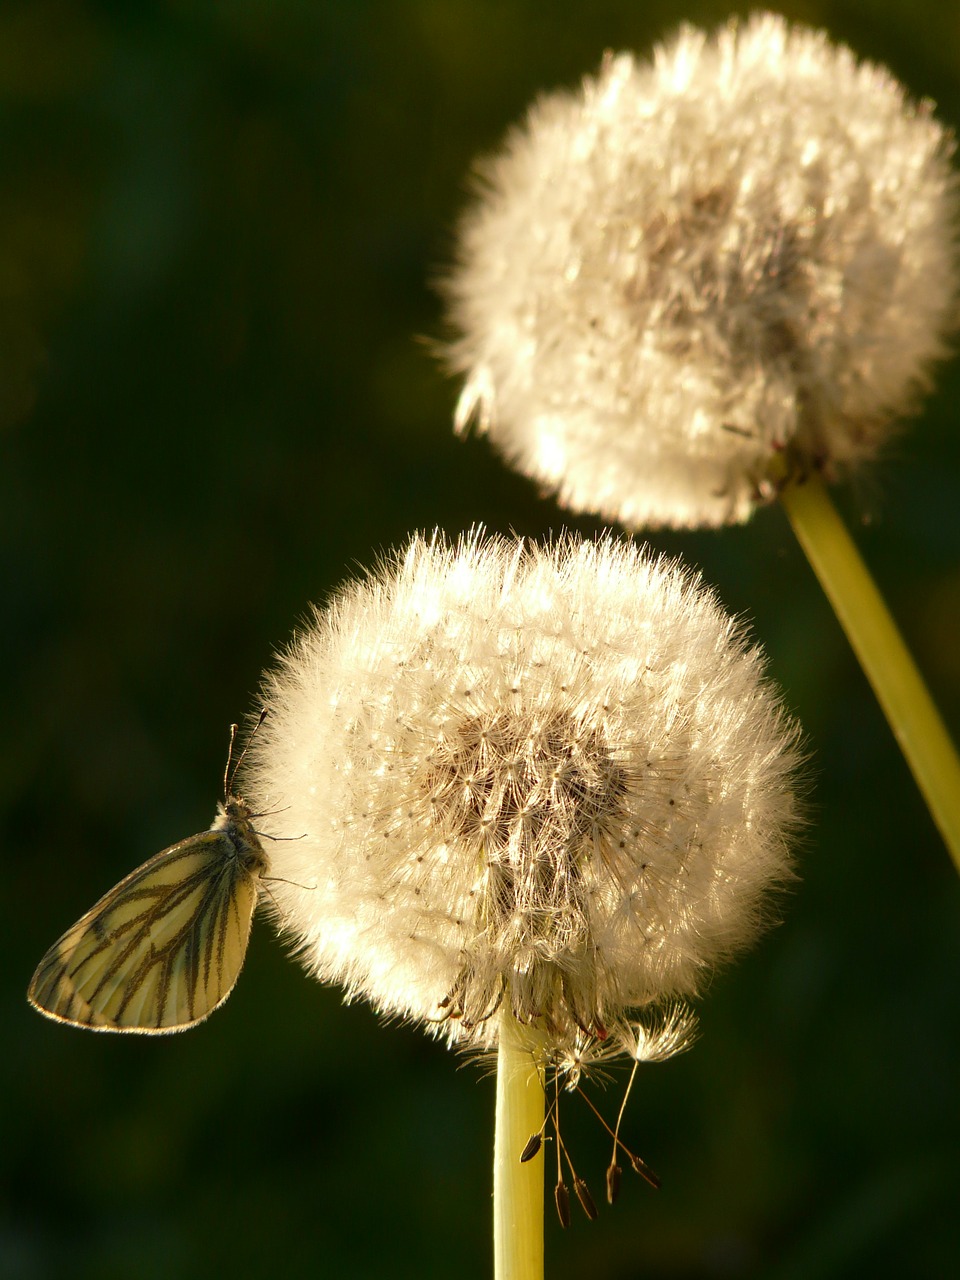 dandelion,seeds,flower,meadow,spring,stalk,green veined white,white ling,butterfly,free pictures, free photos, free images, royalty free, free illustrations, public domain